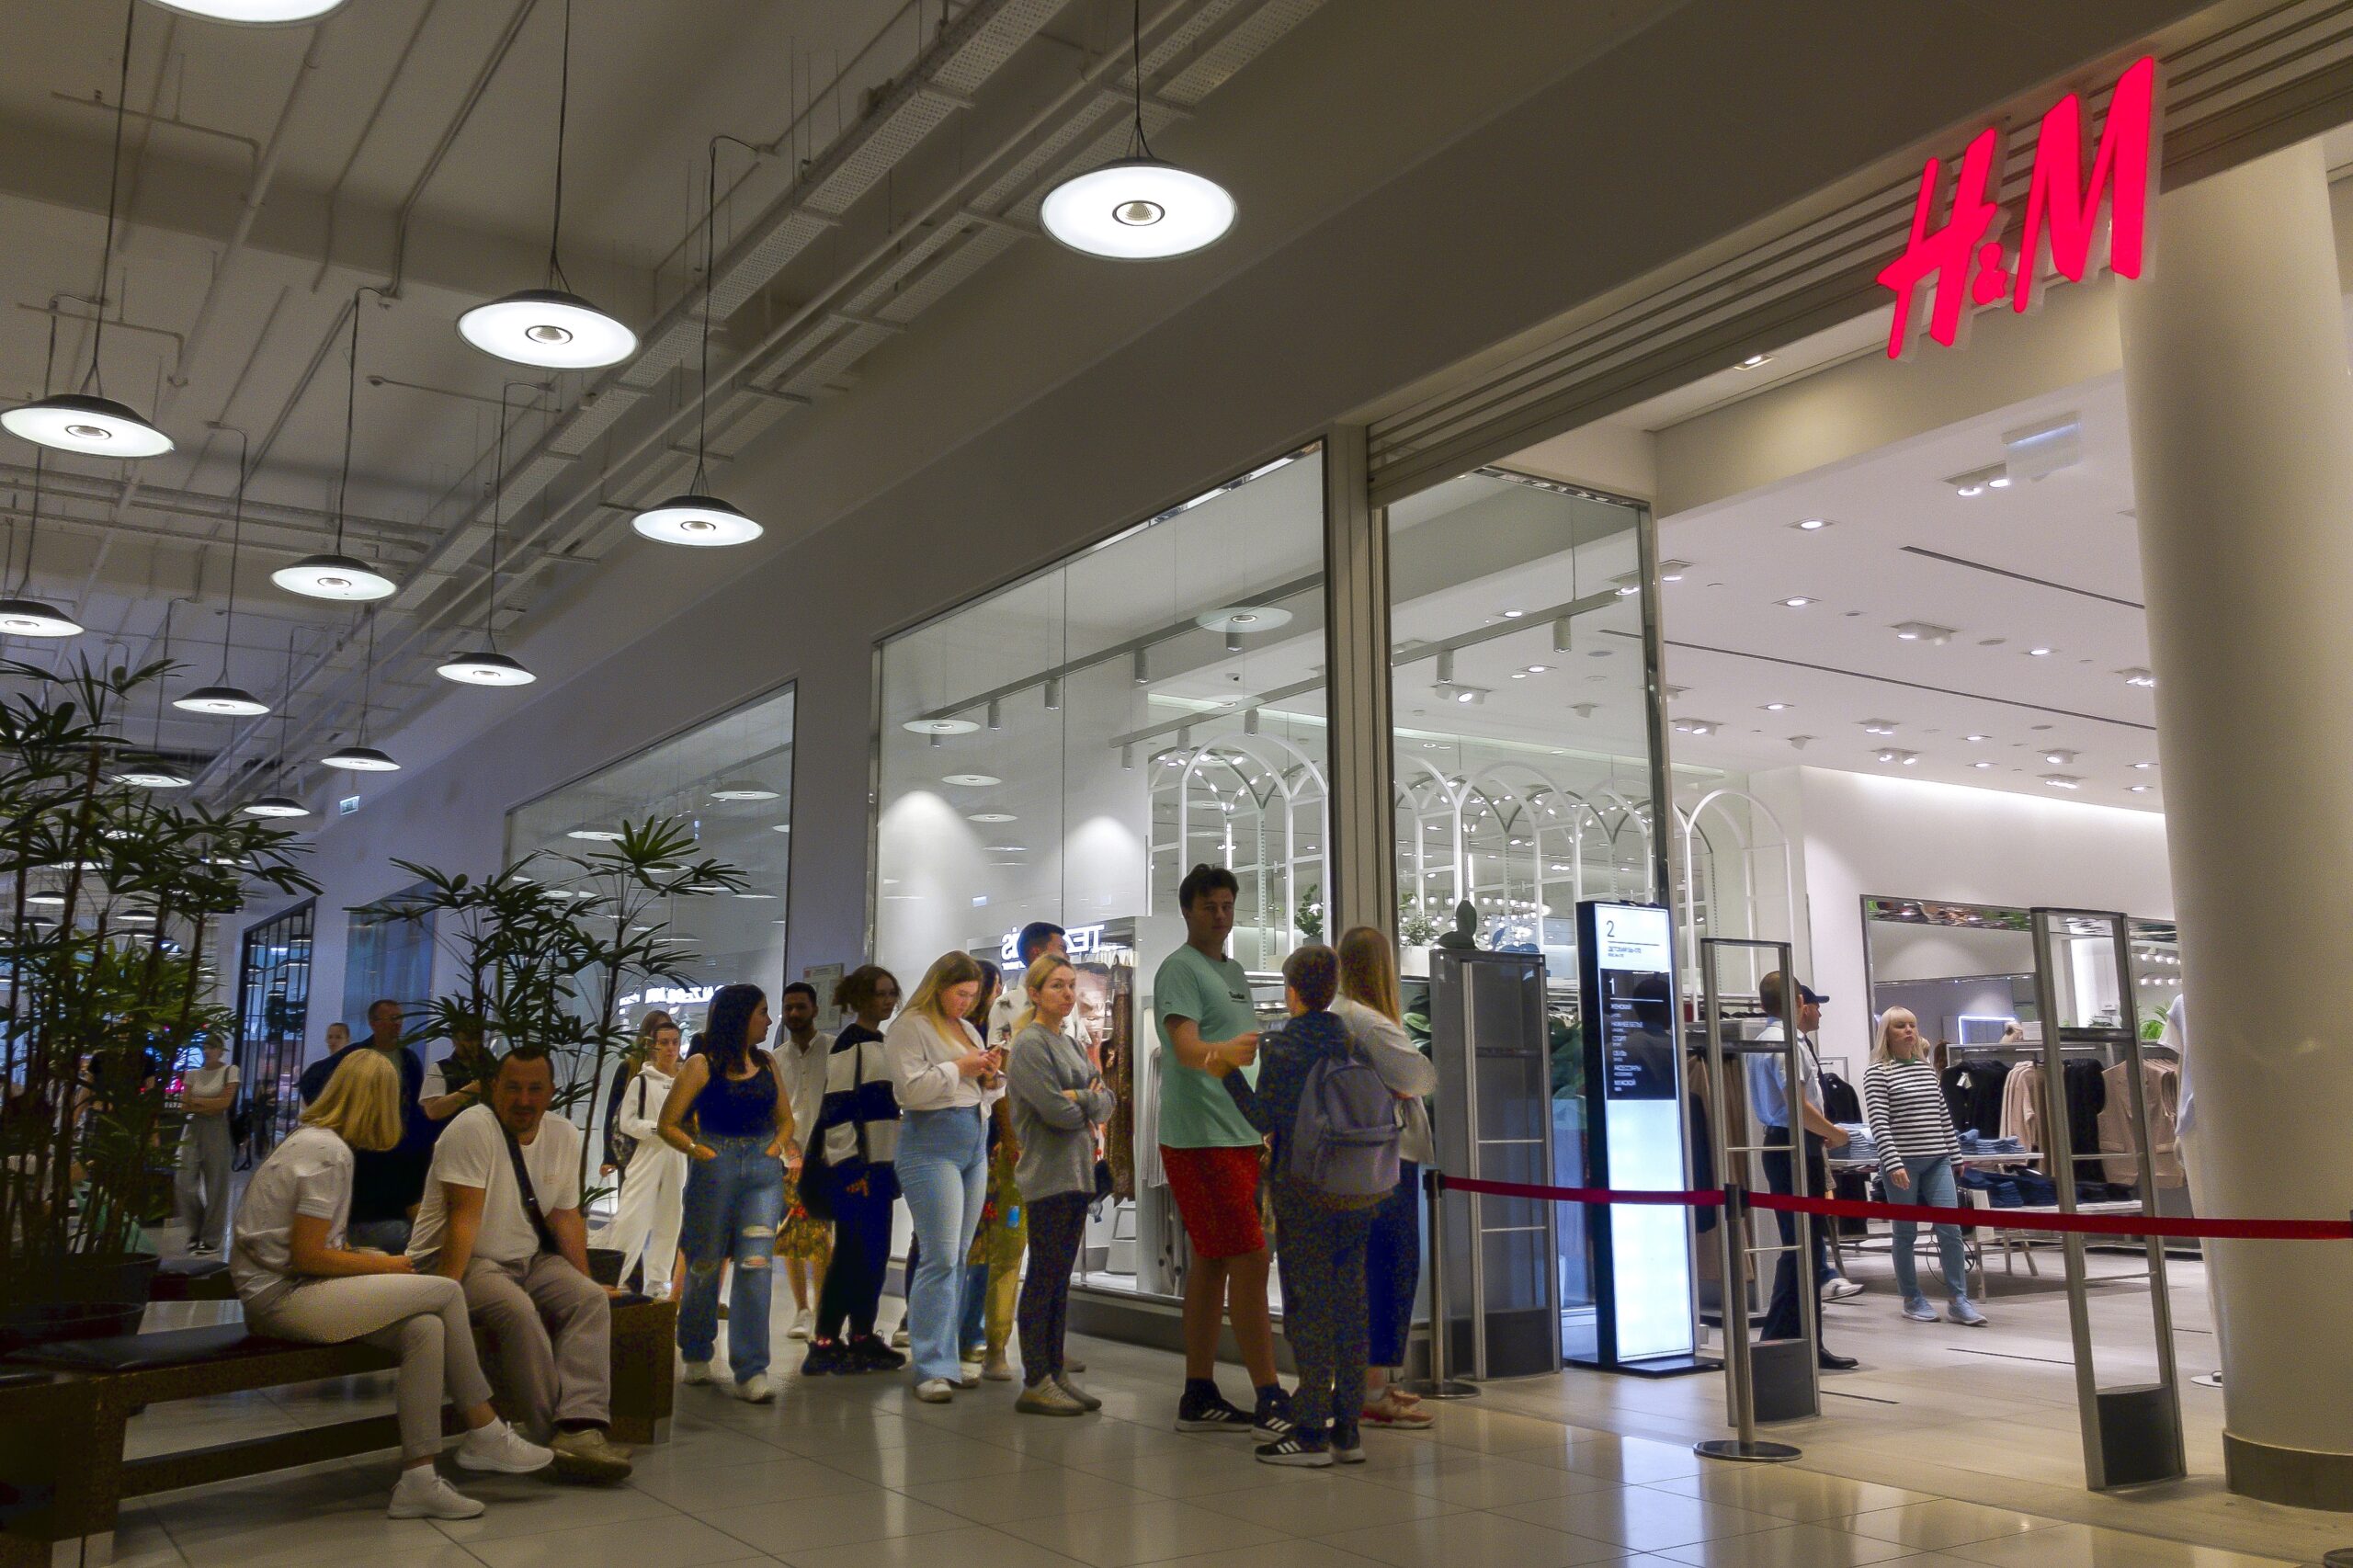 Russians Buy Last Goods from H&M, IKEA As Stores Wind Down